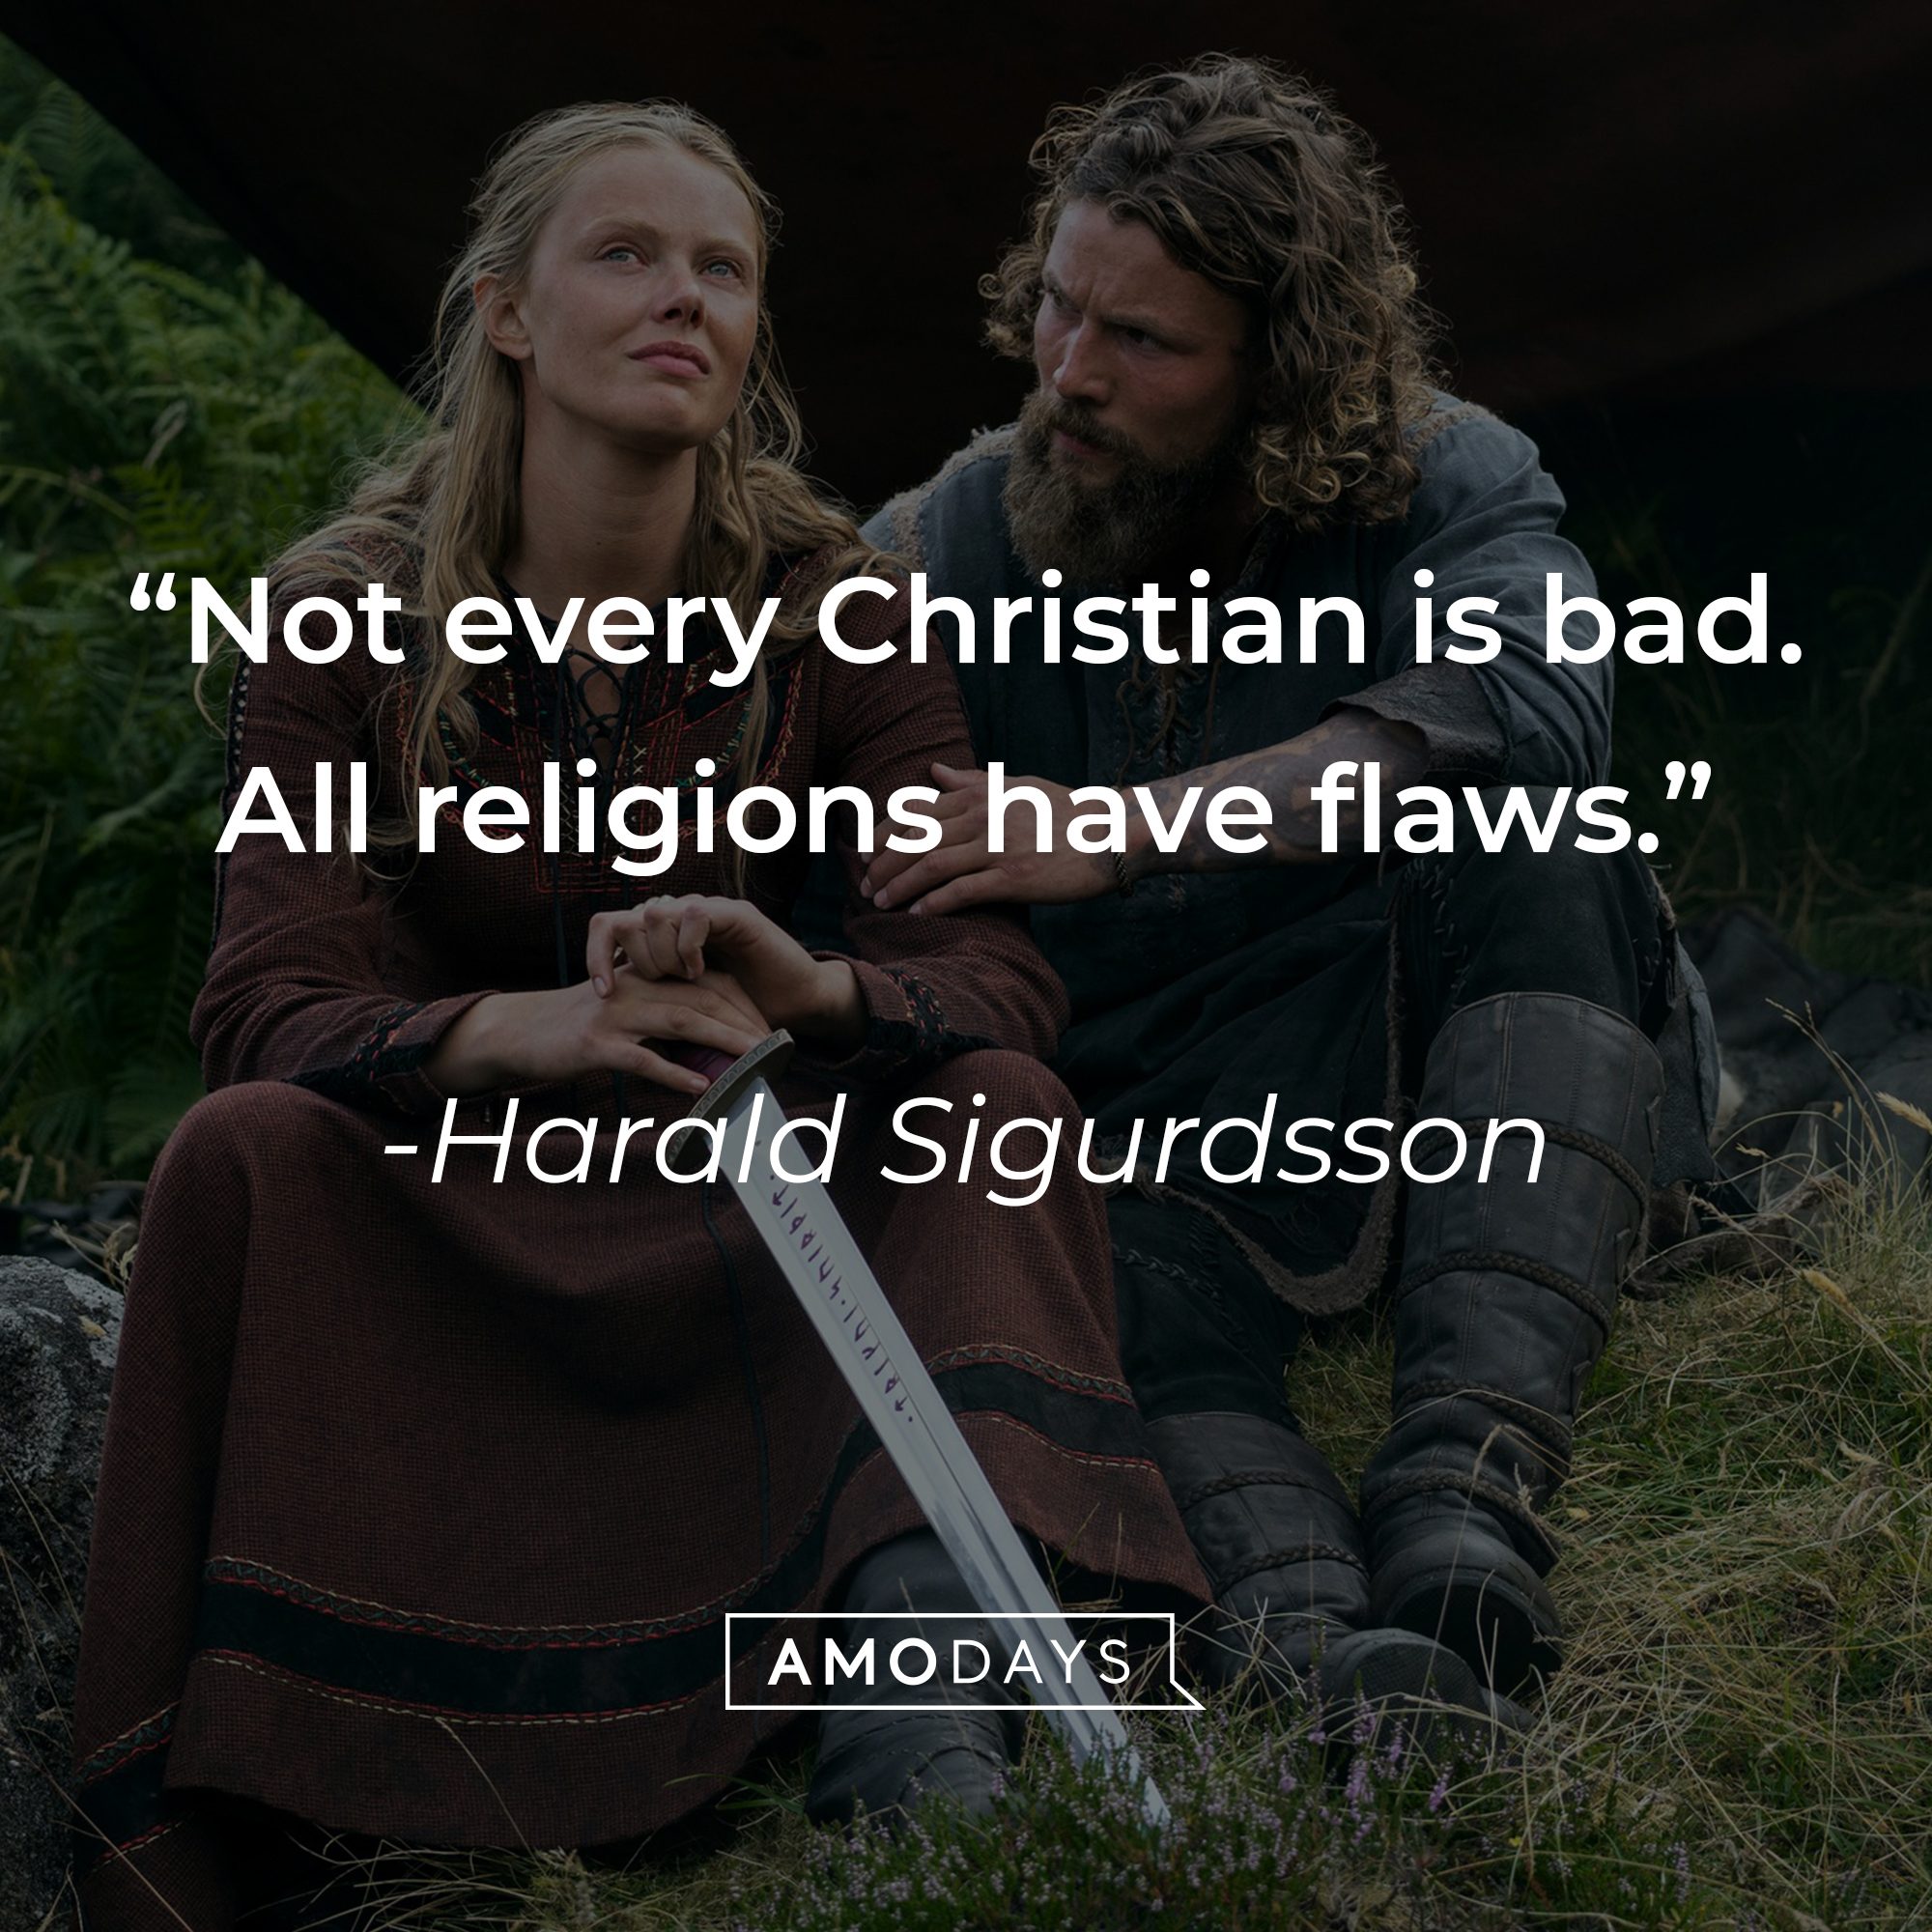 Harald Sigurdsson's quote: "Not every Christian is bad. All religions have flaws."┃Source: facebook.com/netflixvalhalla